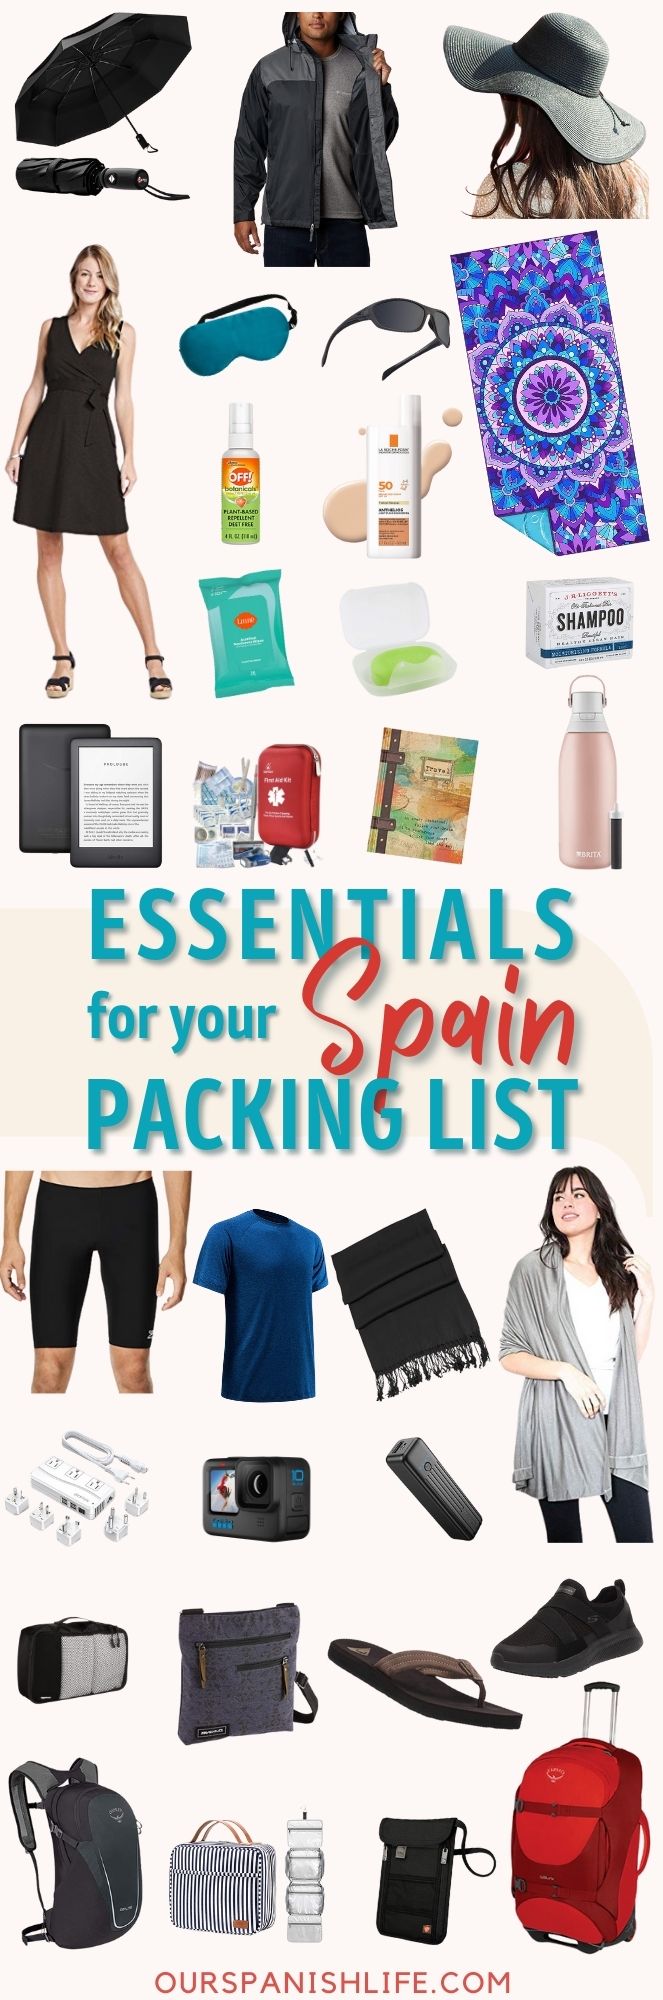 Essentials for Your Spain Packing List